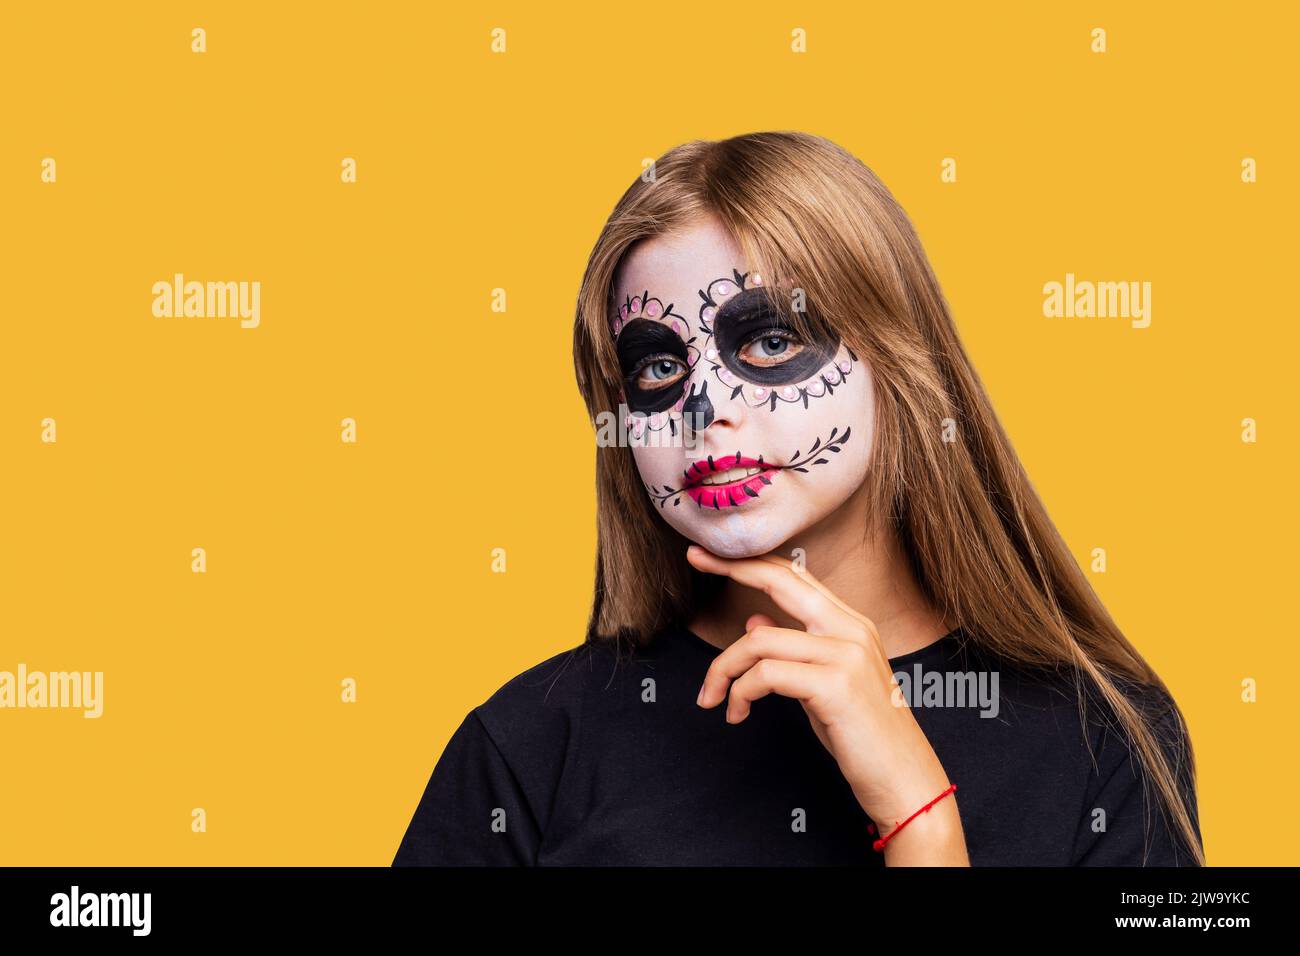 teenager girl with cool skull makeup with roses on head looking at camera in yellow studio Stock Photo